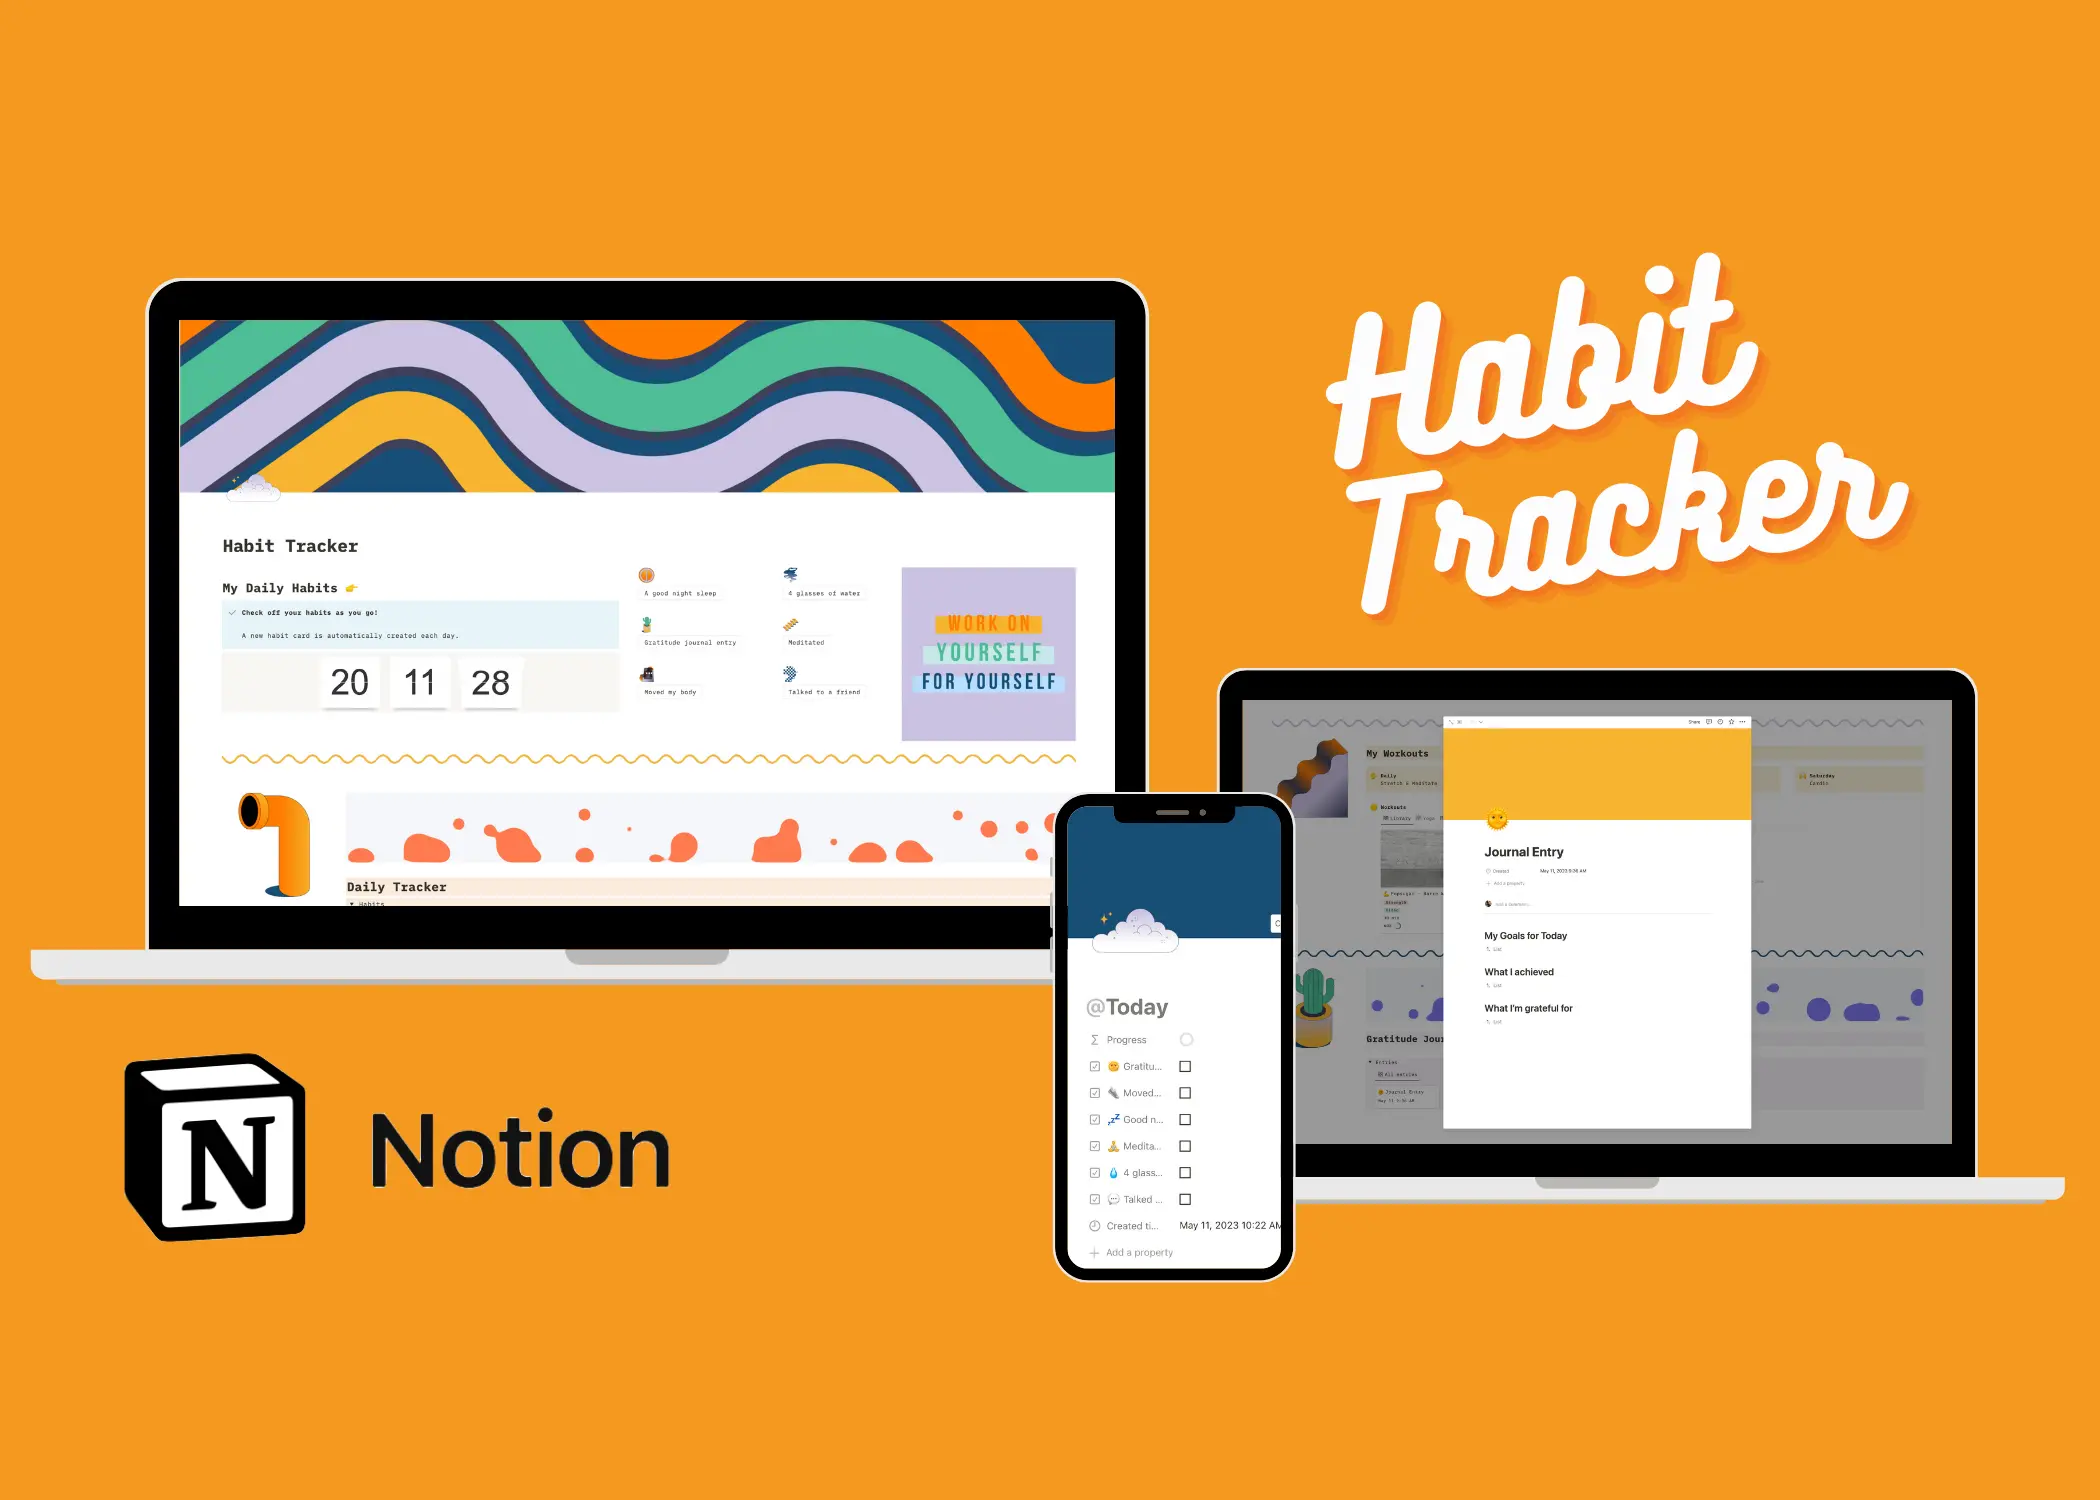 Habit Tracker Template Wellbeing & Daily Journal image